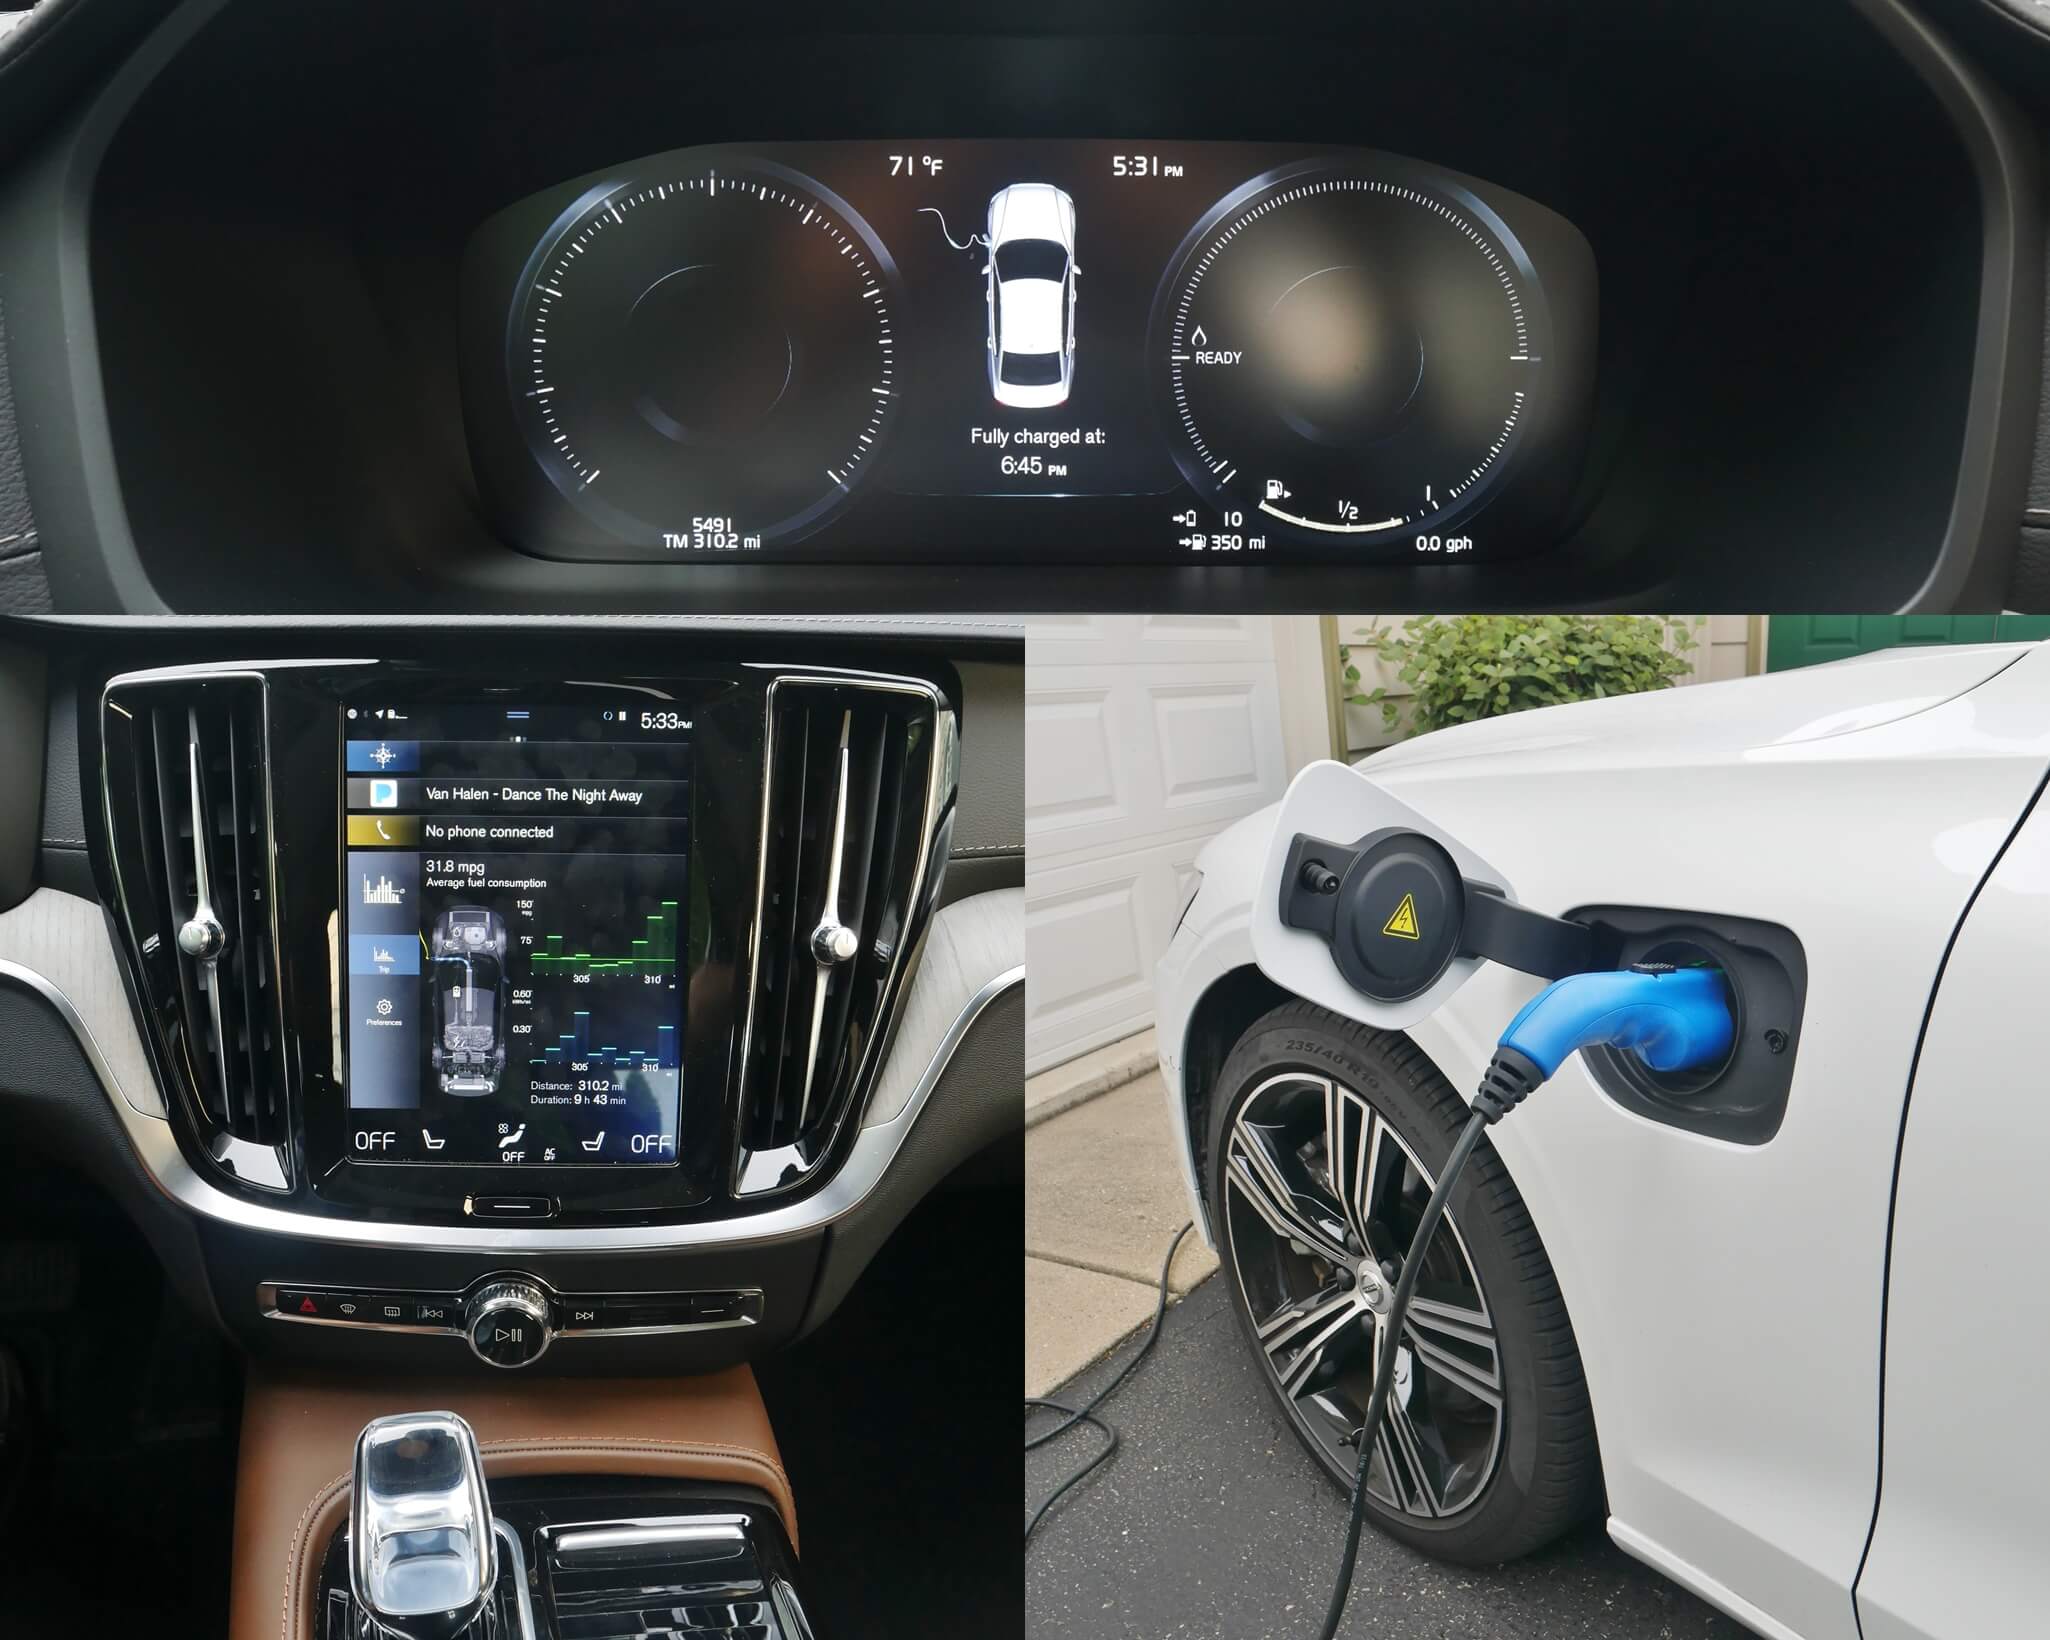 2020 Volvo S60 T8 AWD PHEV: 3.7 kWh, 16 A Type 2 plug in charging on either 110 VAC / 220 VAC